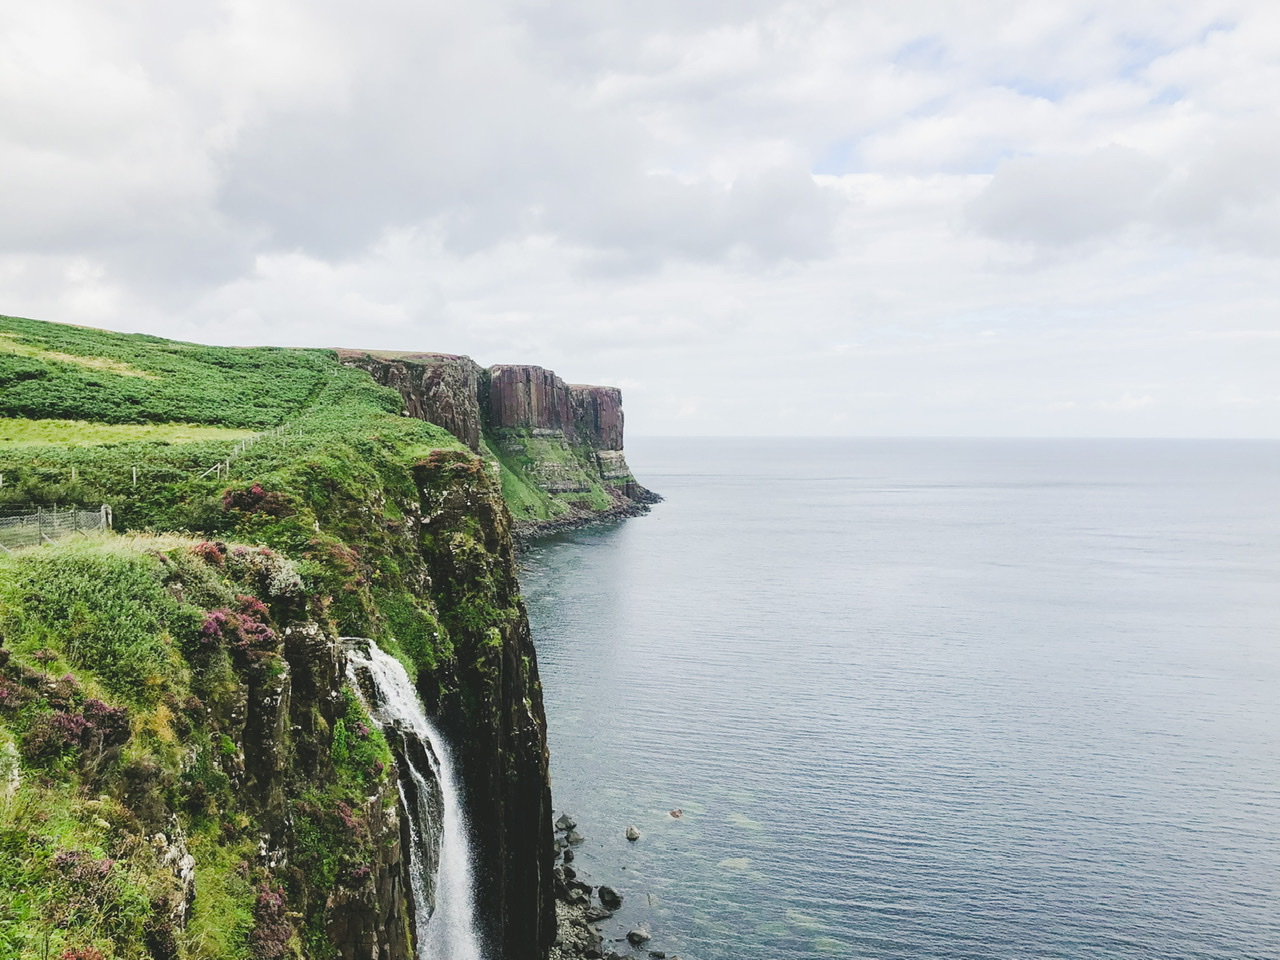 Green covered cliffs and Mealt Falls on the right fall away into rocky ocean on a cloudy day in Scotland